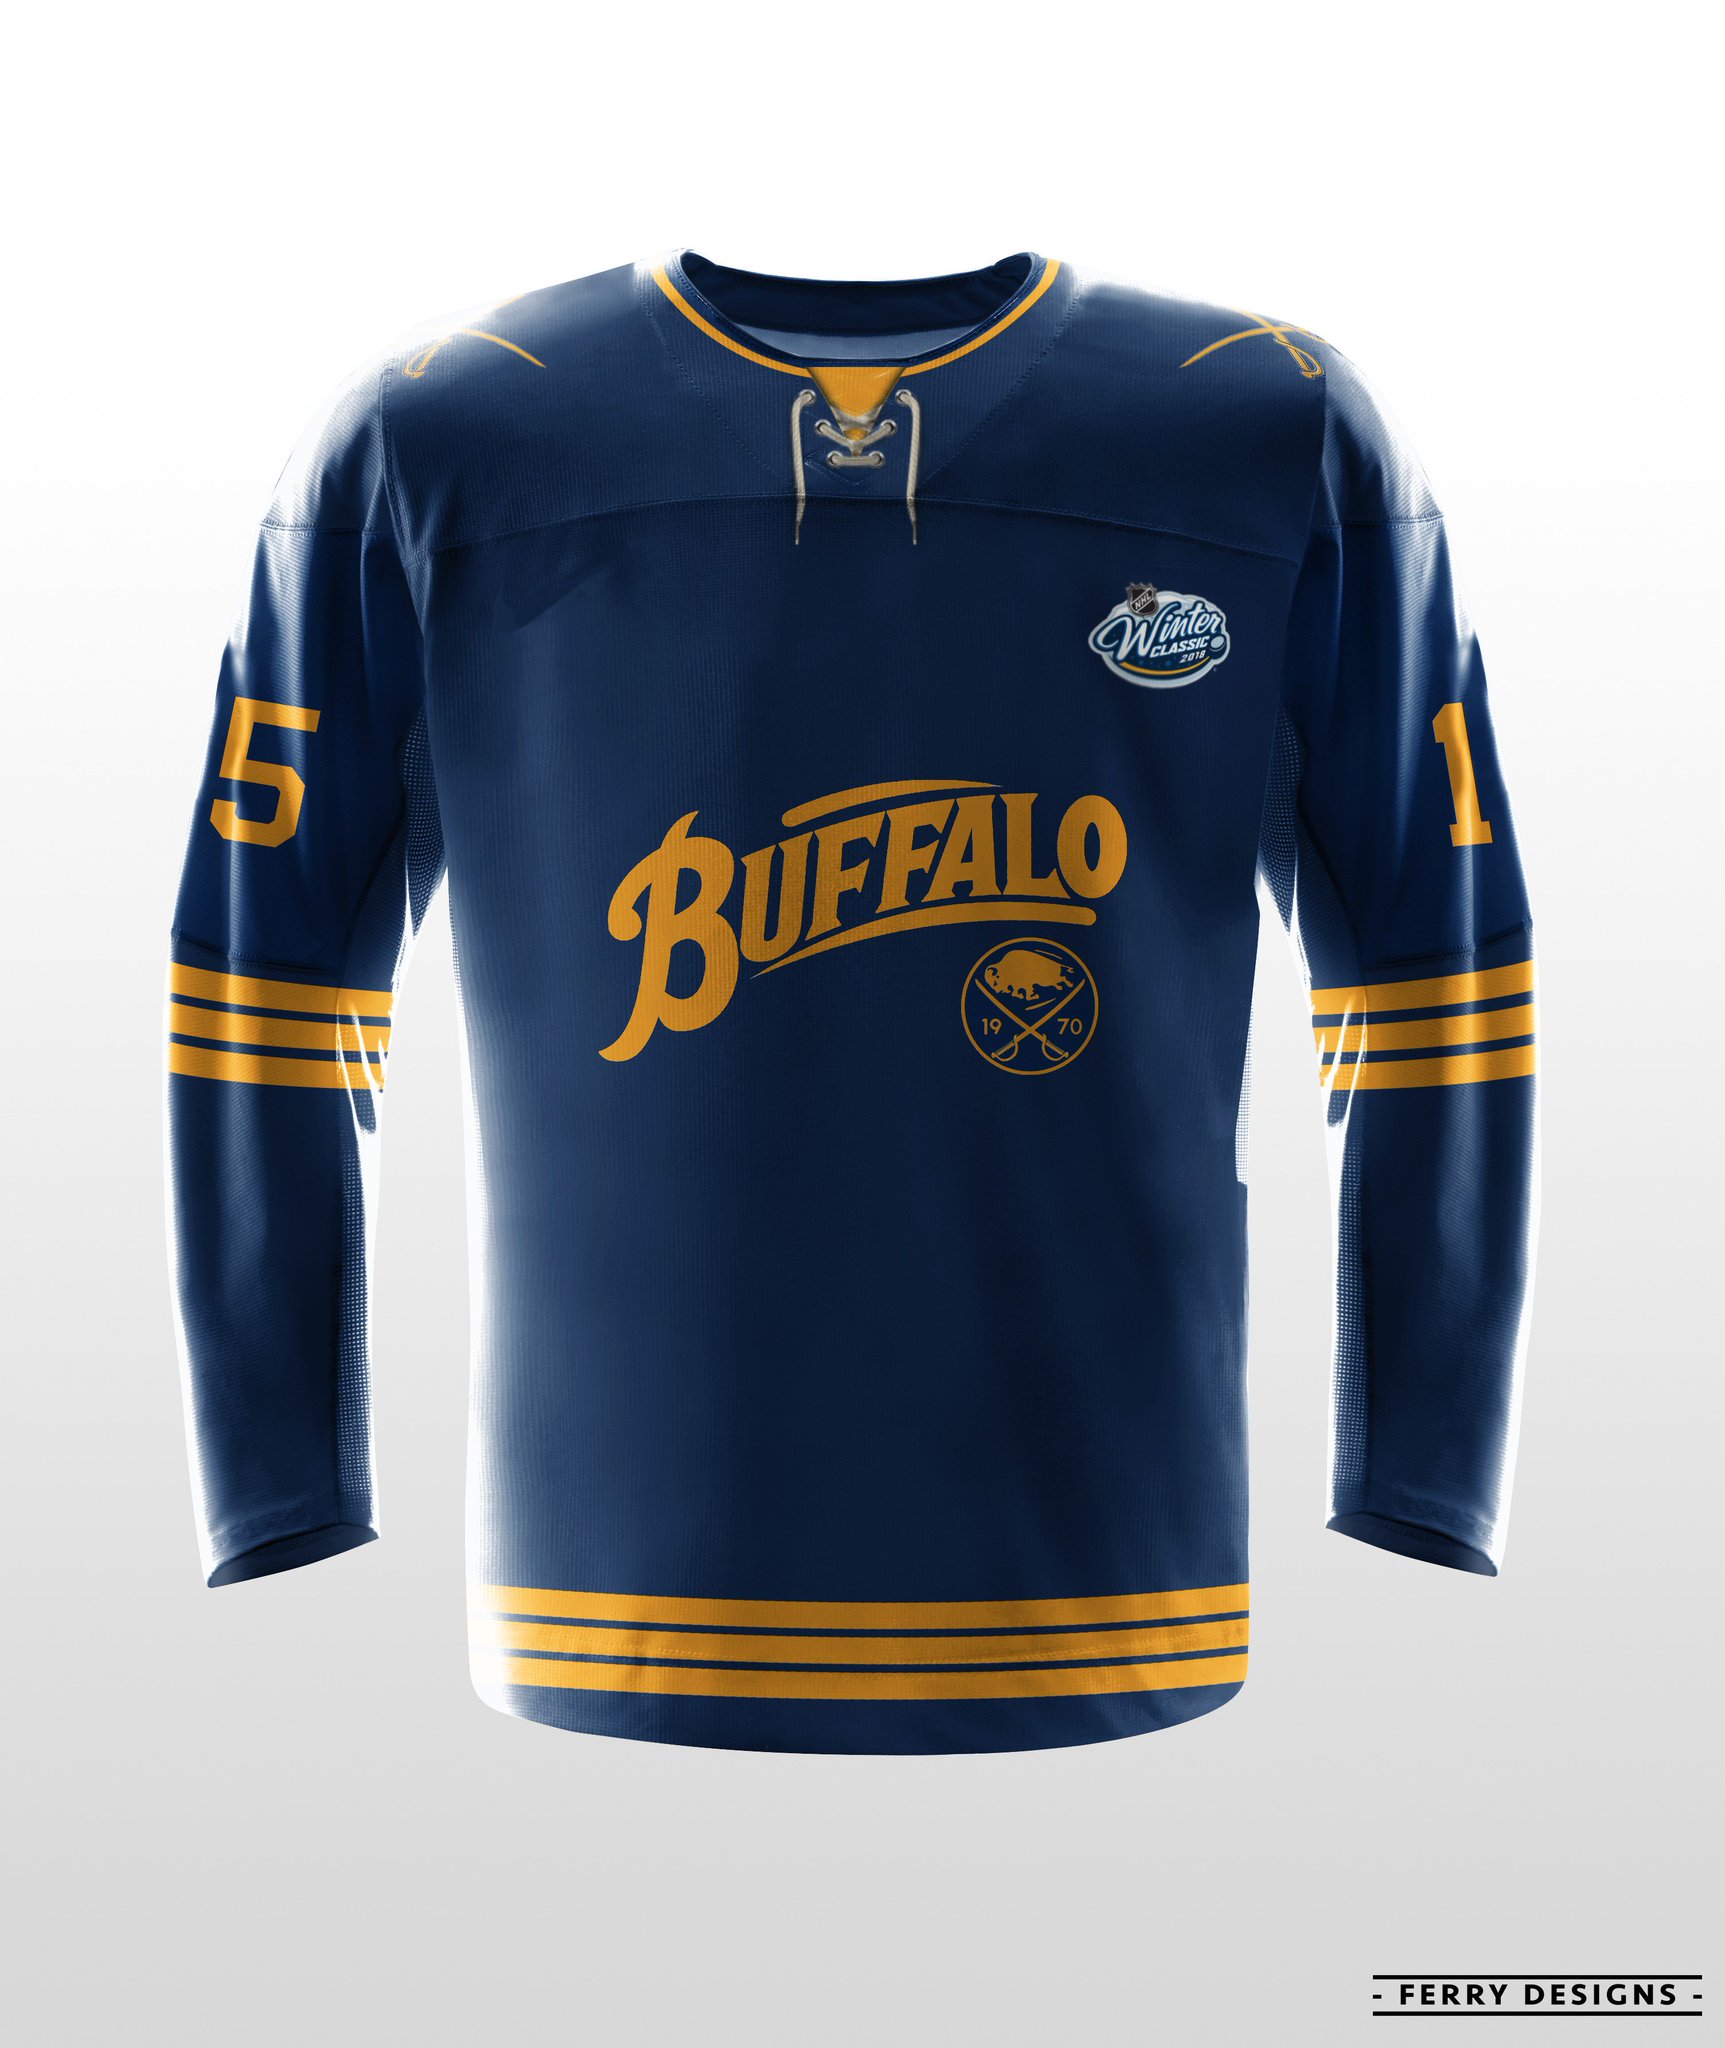 2018 Buffalo Sabres Winter Classic Blue Practice Jersey - Size 56